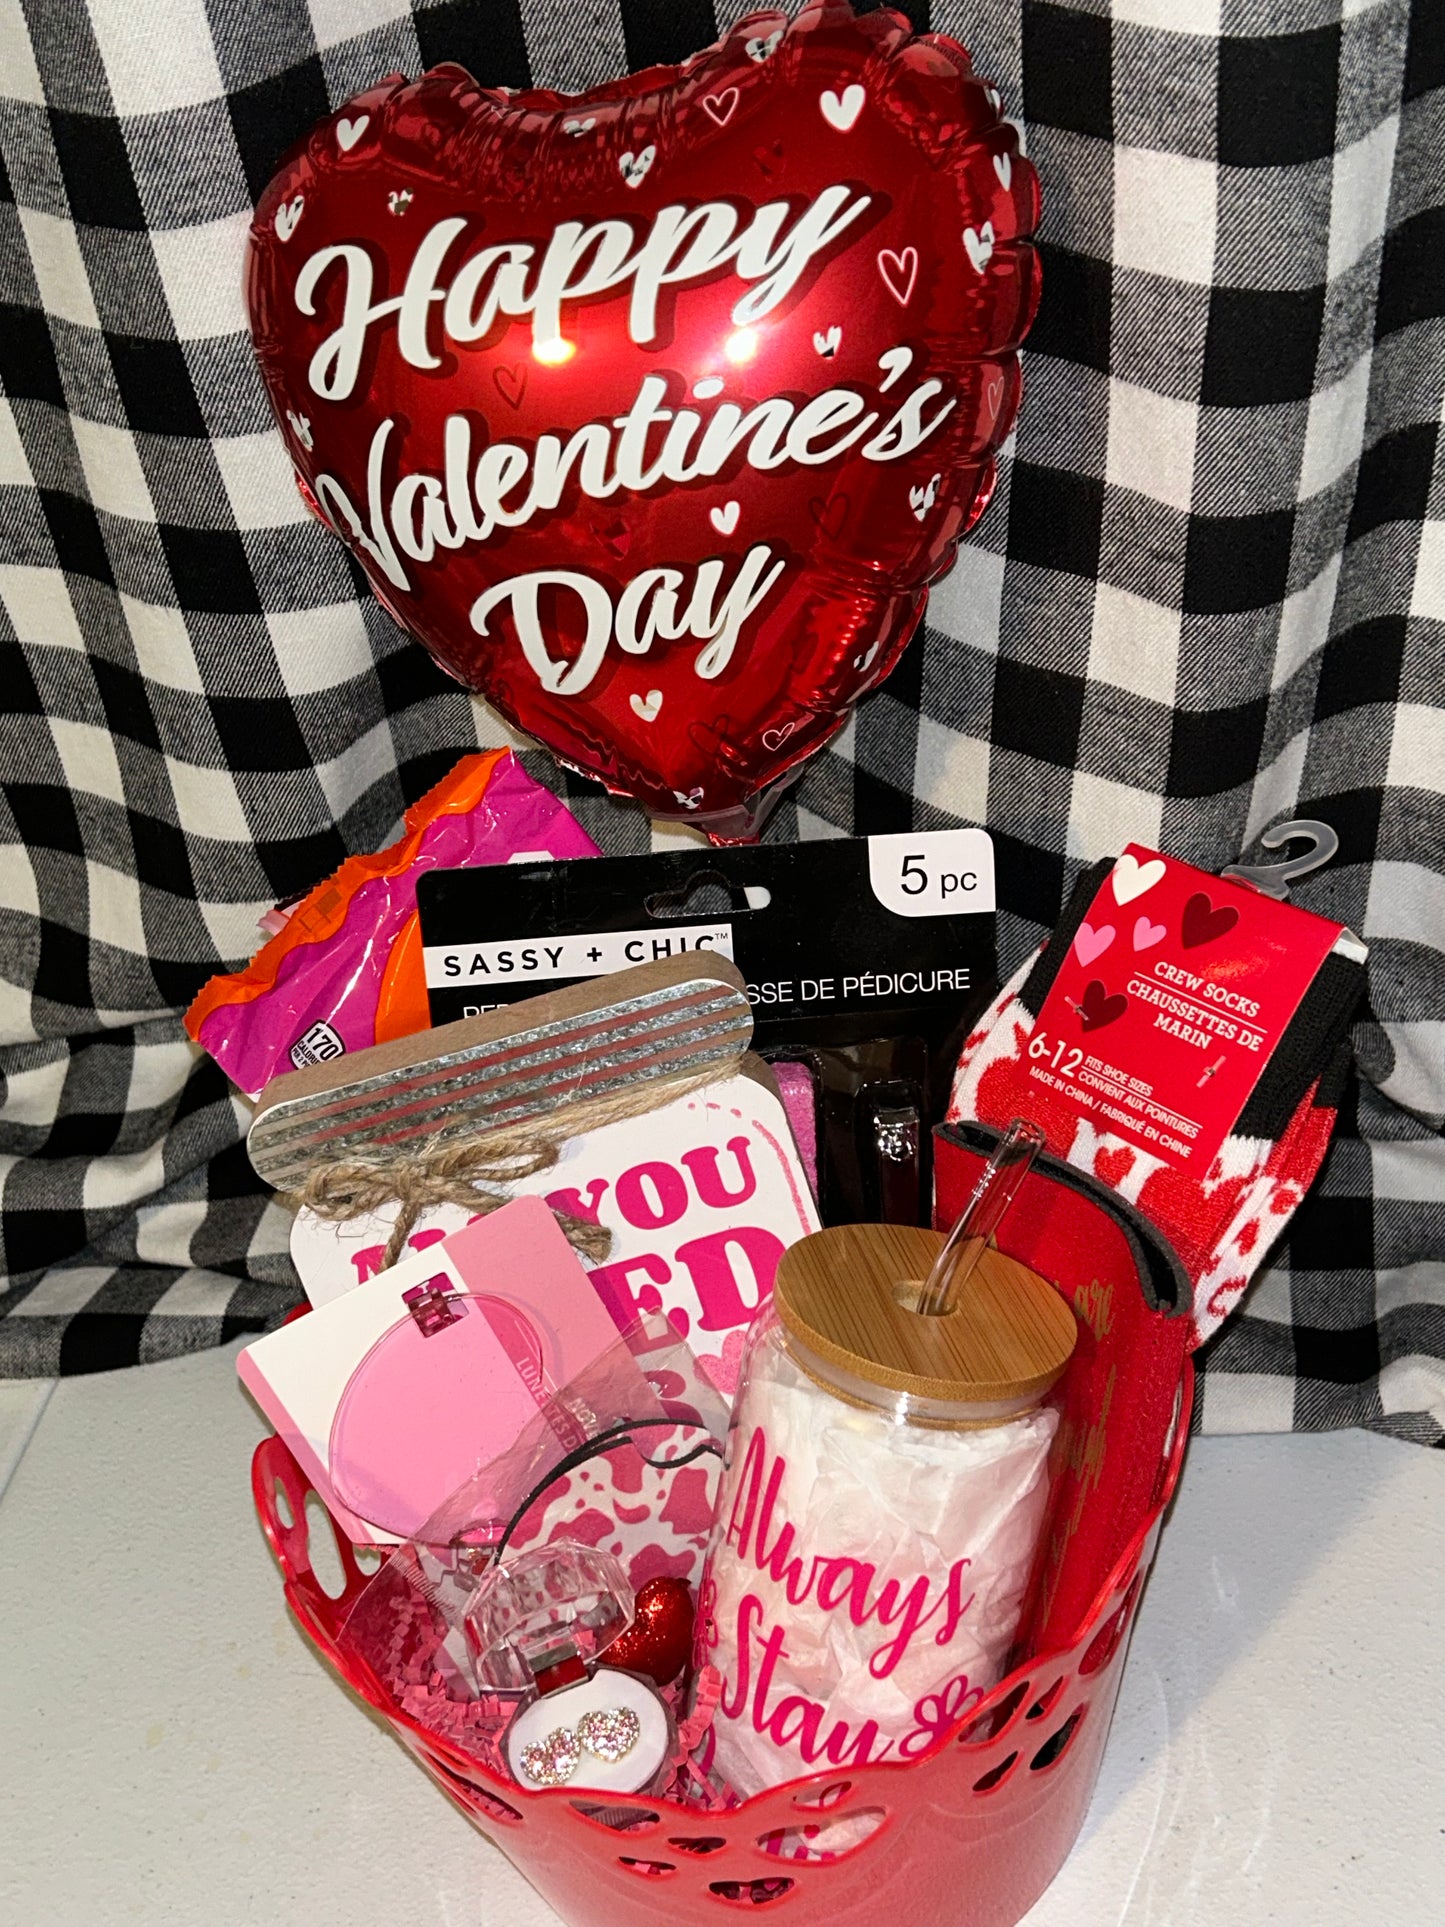 One of a Kind Valentine’s Day Basket for Her